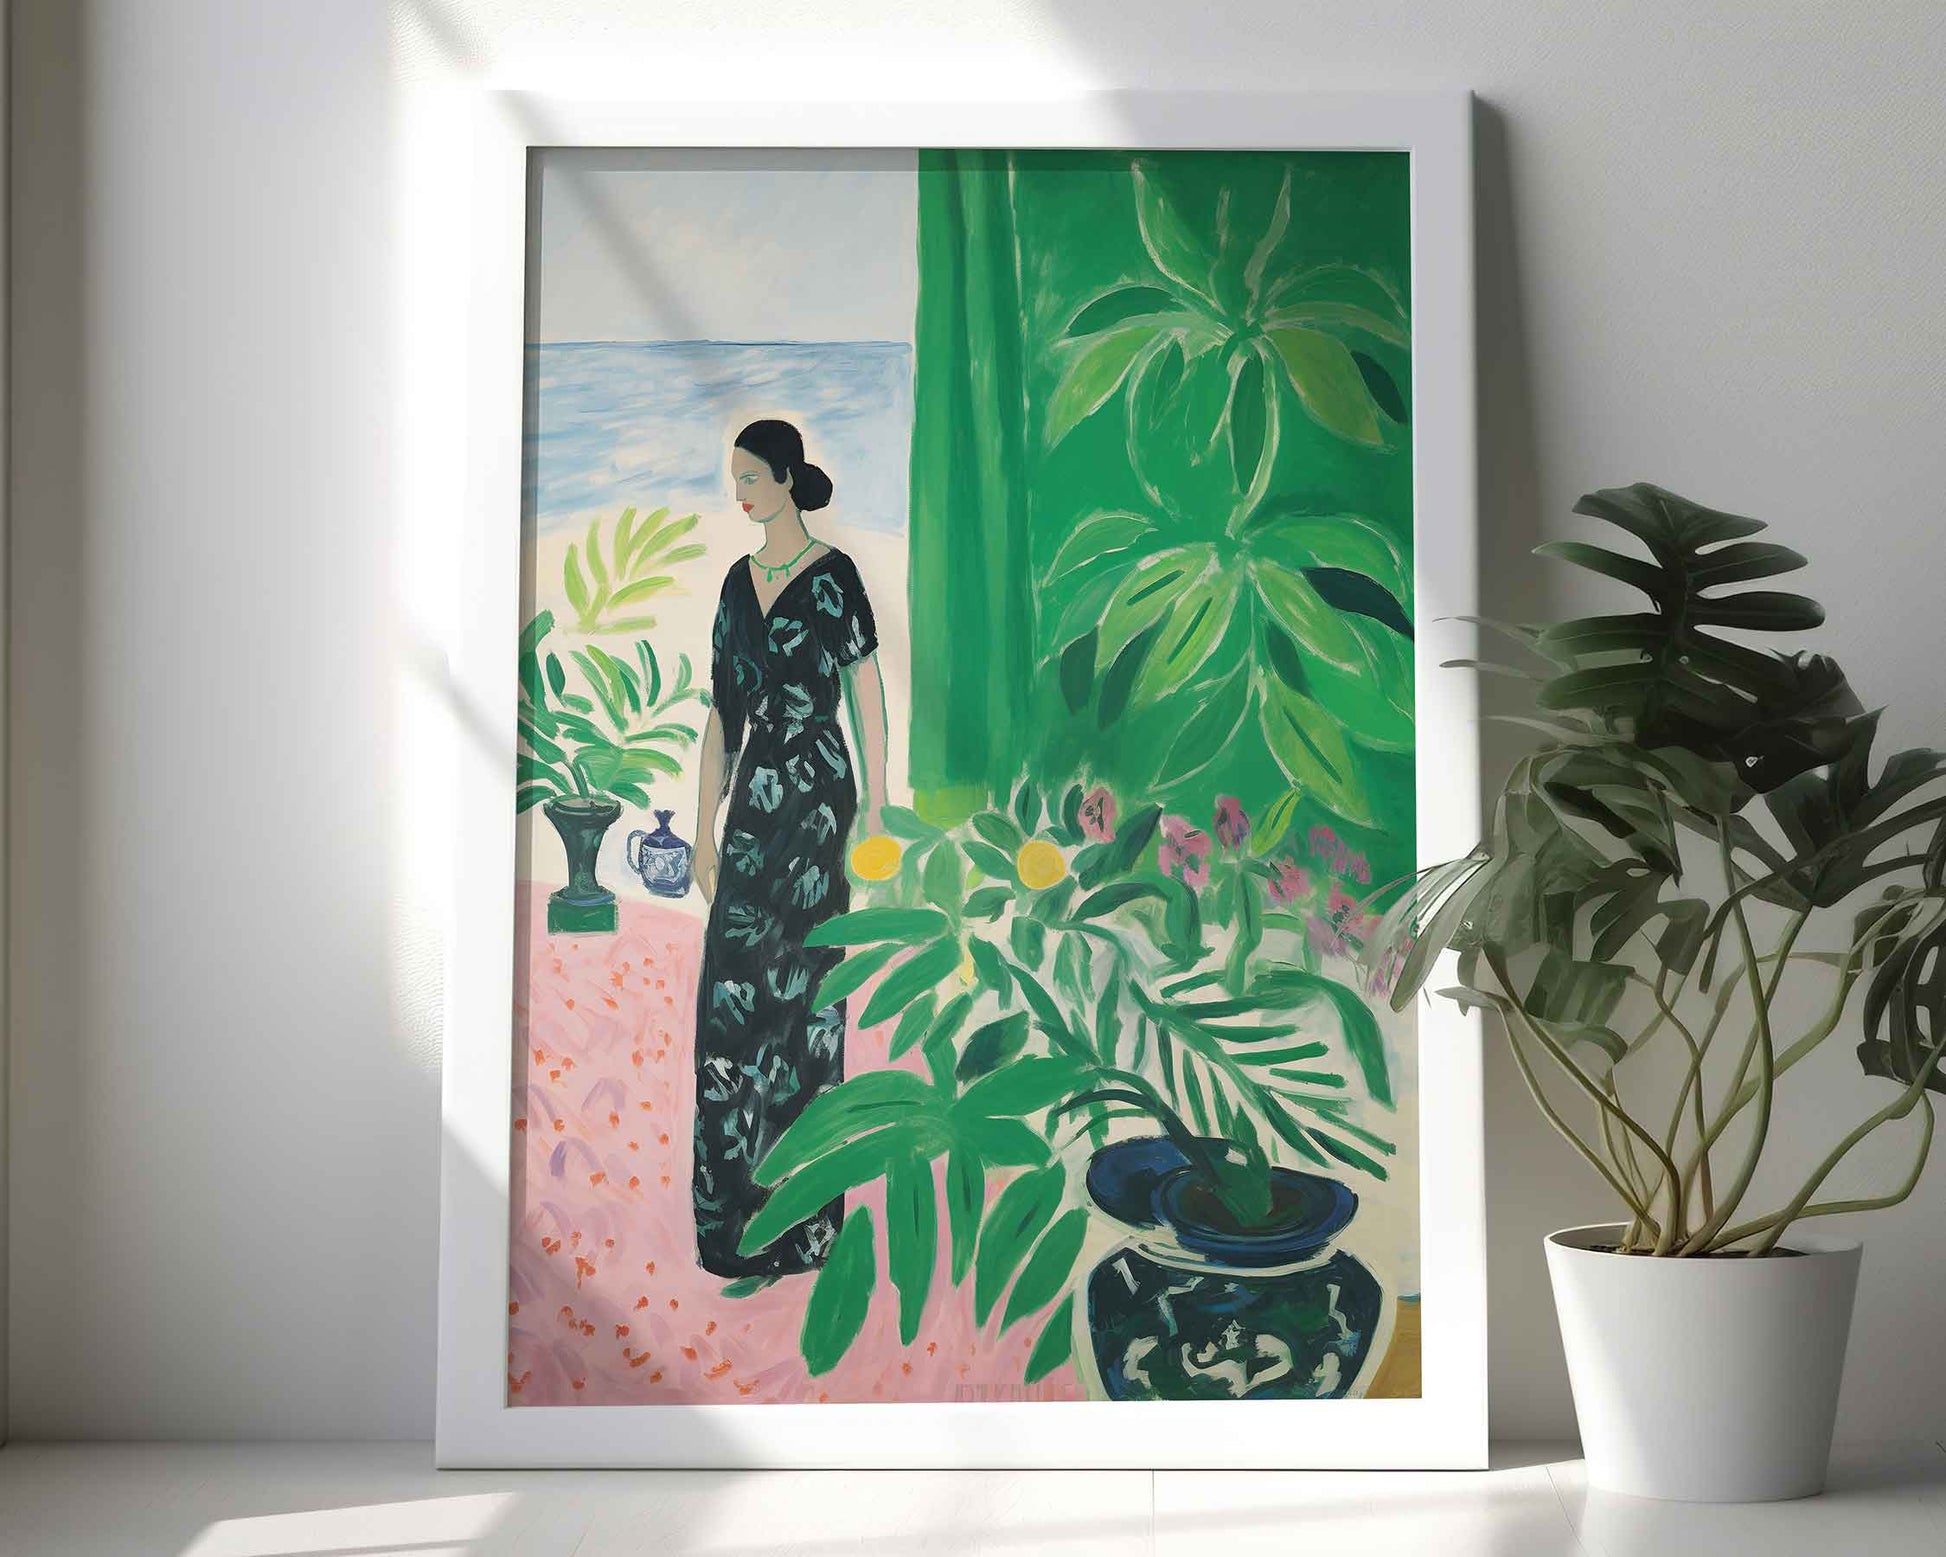 Framed Image of Matisse Wall Art Style Poster Print Green Themed Oil Paintings